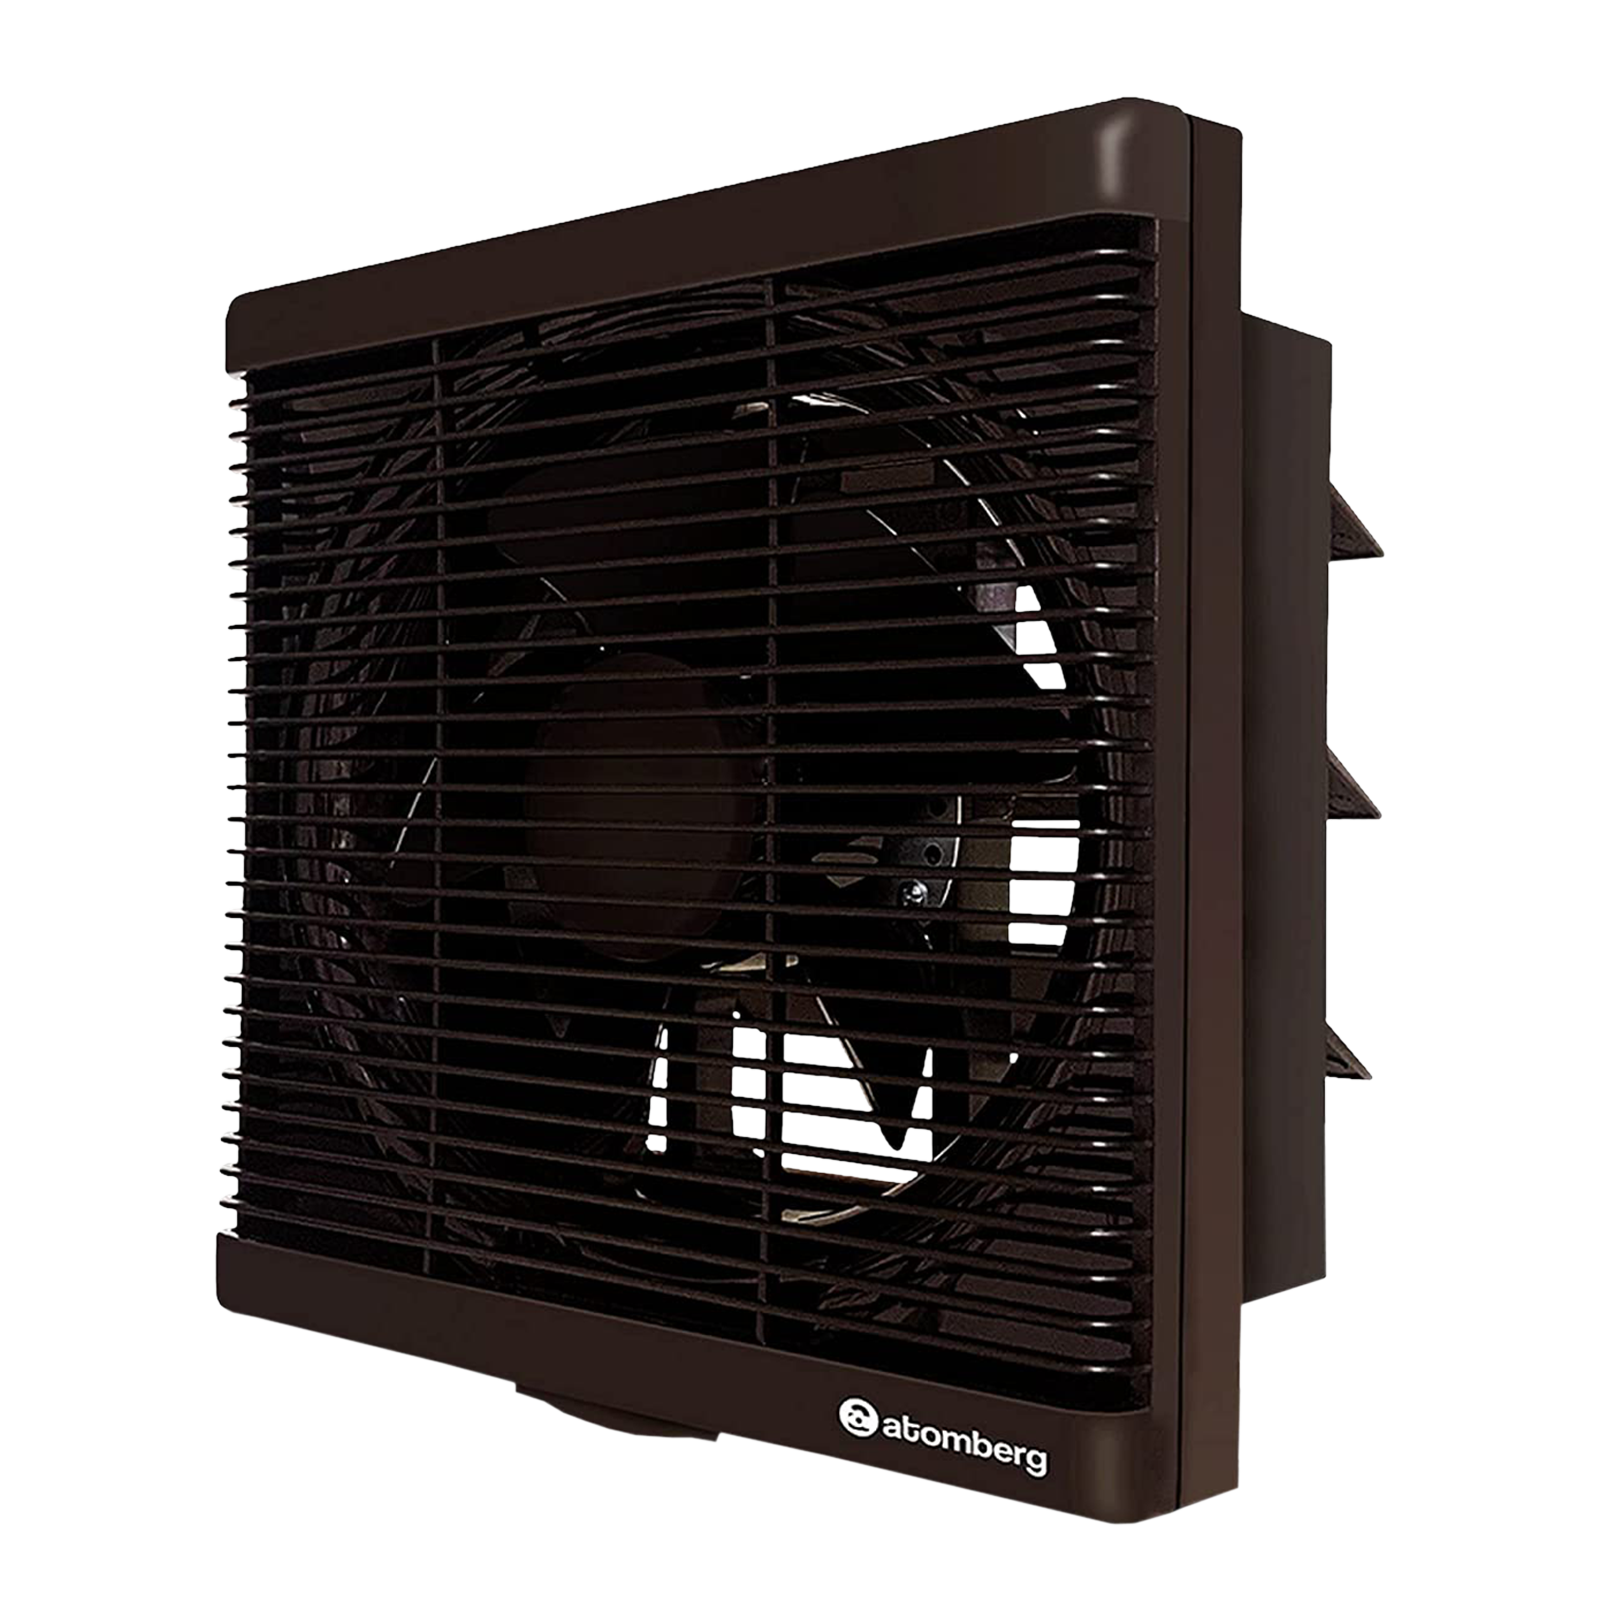 atomberg Efficio 8 Inch 200mm Exhaust Fan with BLDC Motor (Silent Operation, Umber Brown)